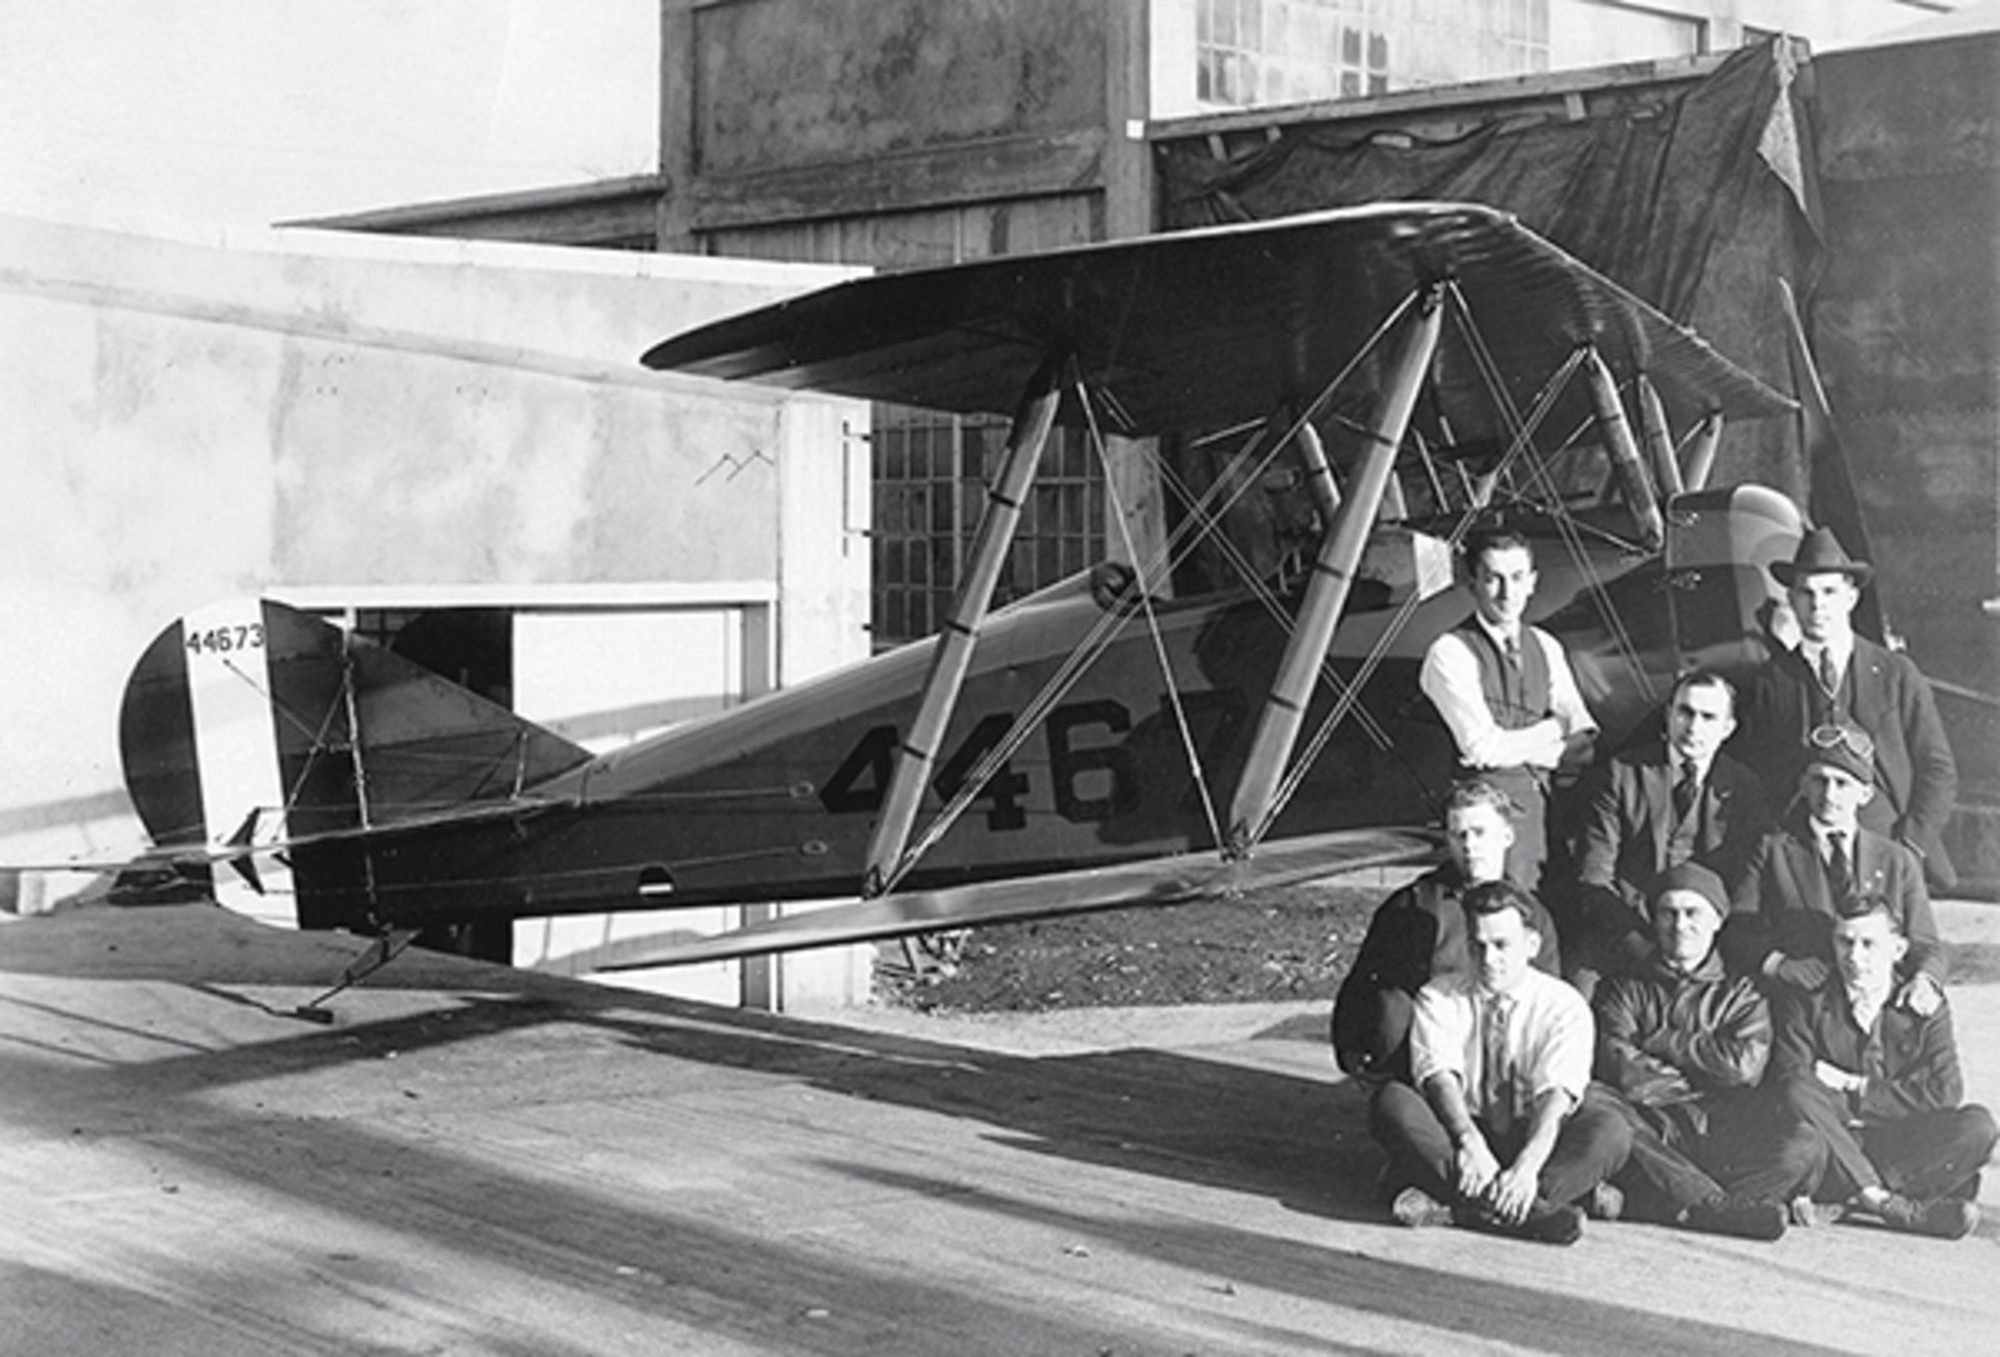 Black and white image of a group of people sitting in front of a Tommy Morse plane